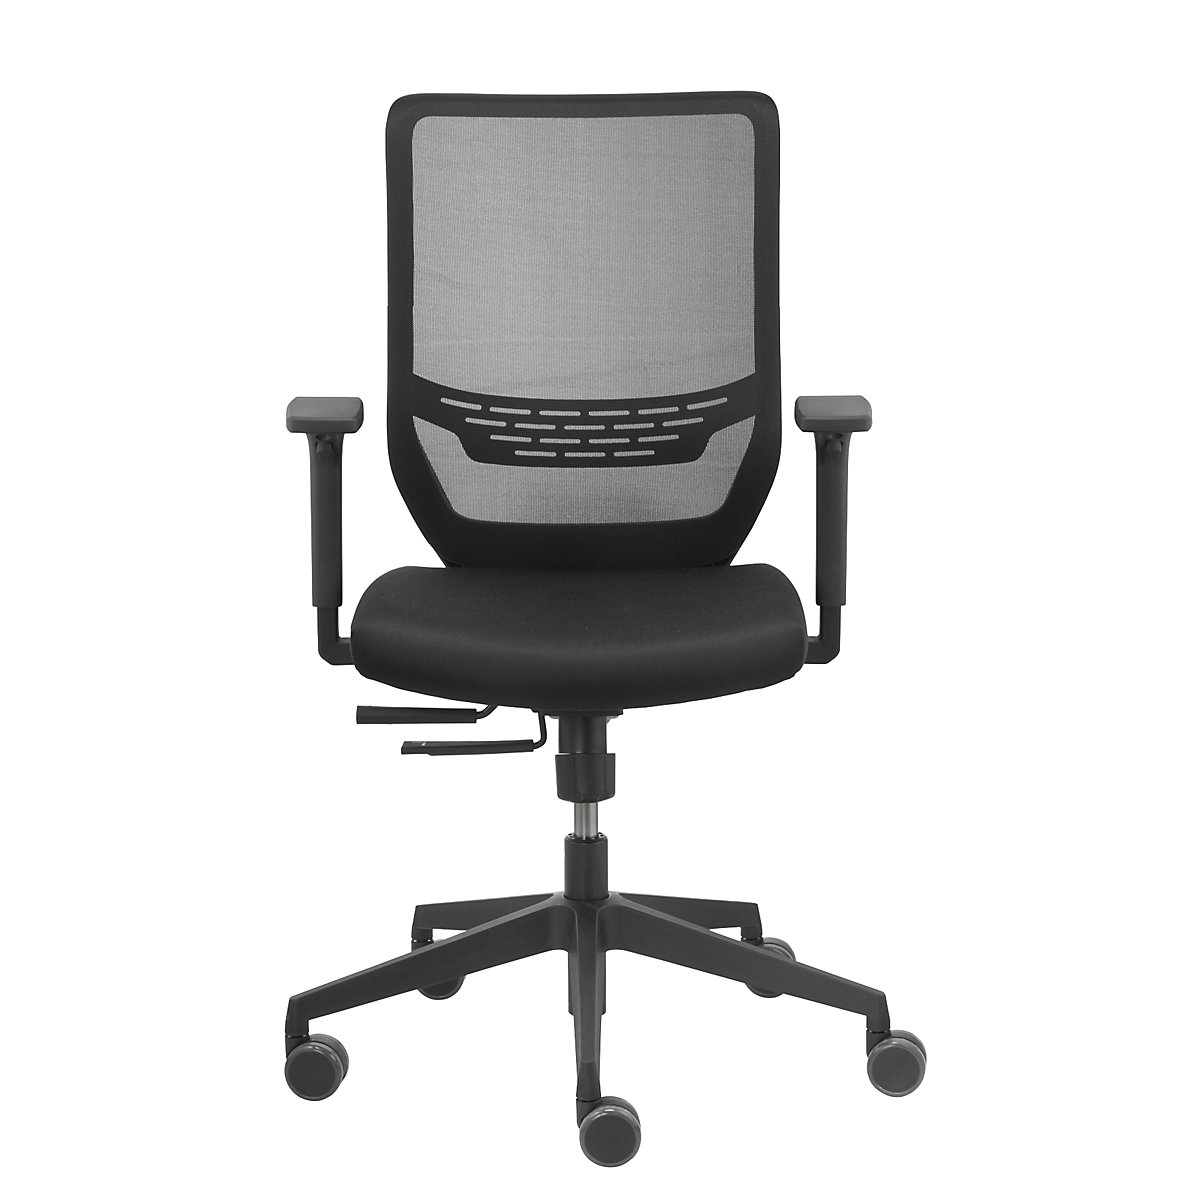 TO-SYNC office swivel chair - TrendOffice